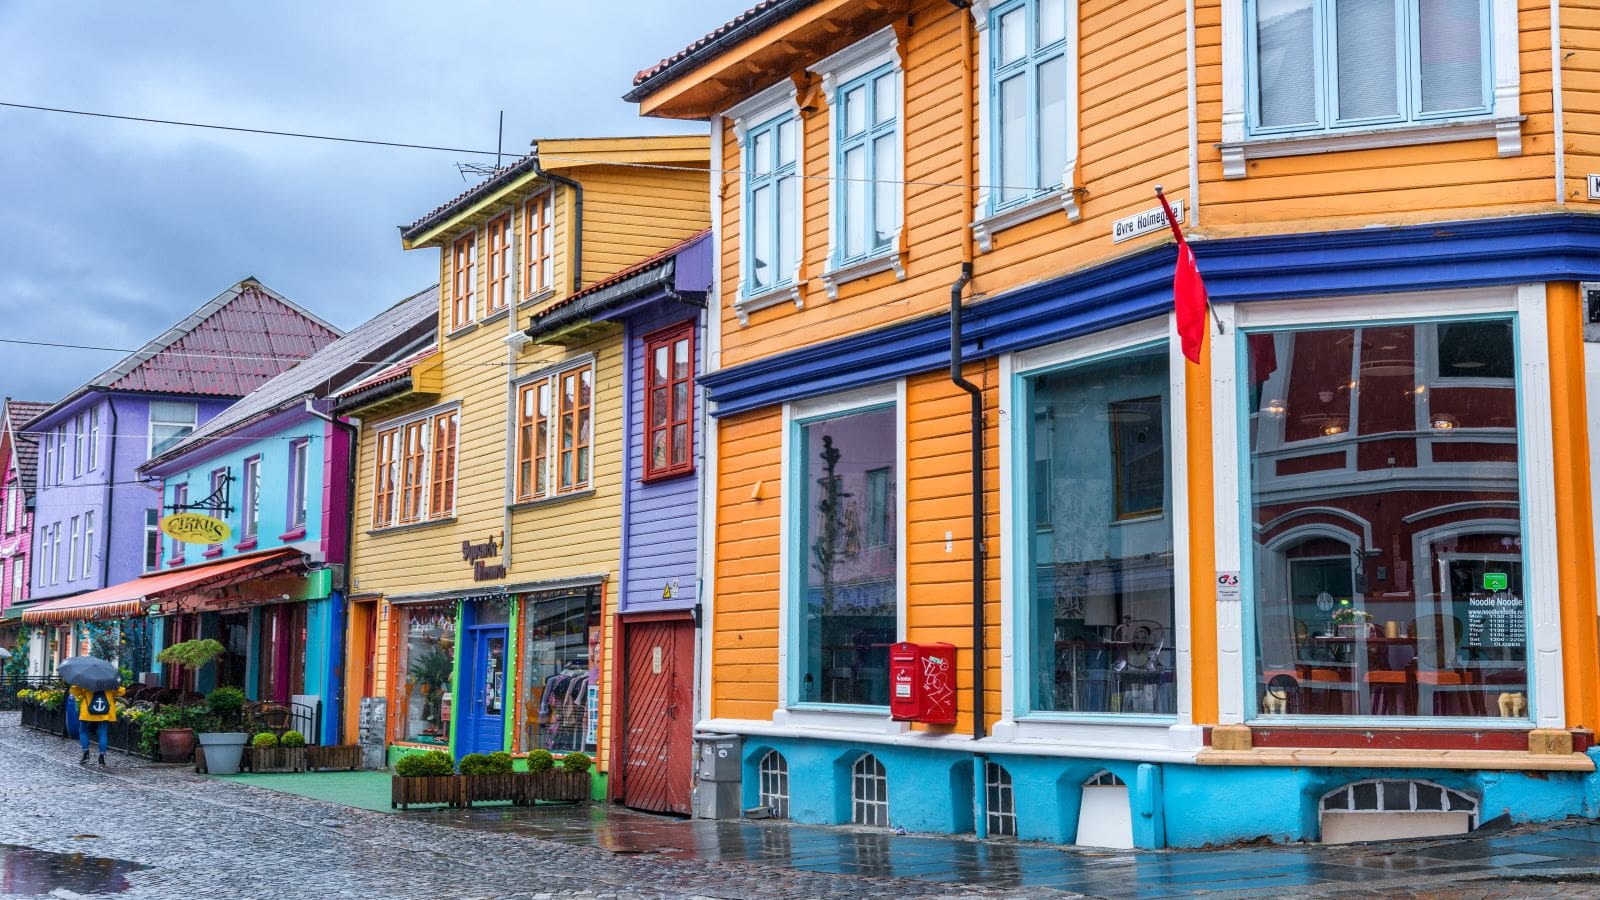 Stavanger - Norway. Colorful historic buildings with small shops and restaurants. Some people in the street.